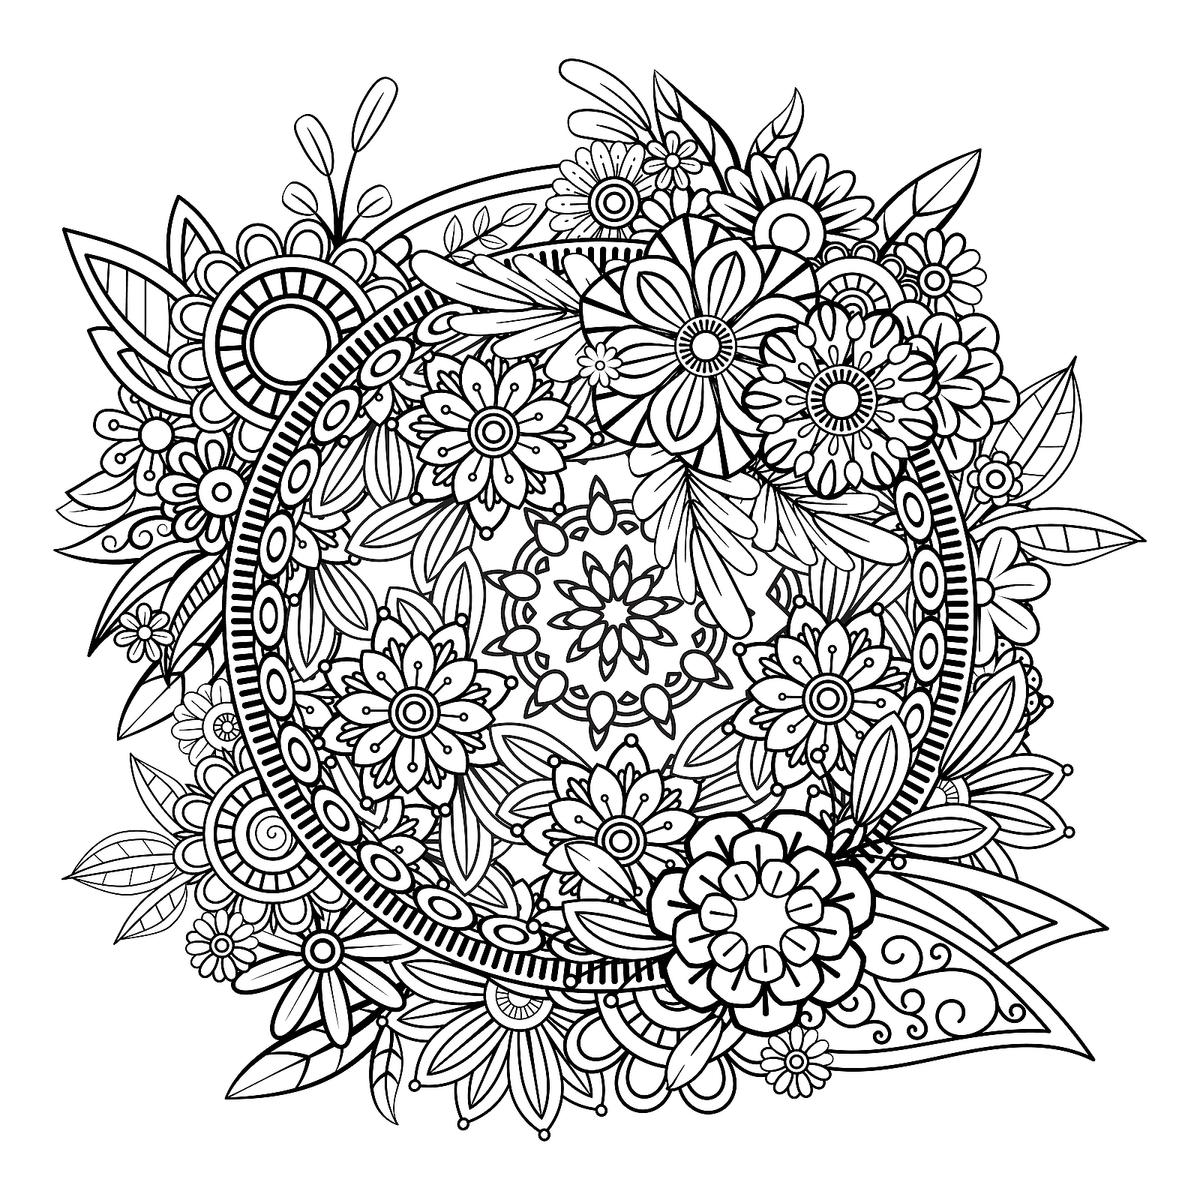 Mandala Coloring Pages: Printable Coloring Pages Of Mandalas For